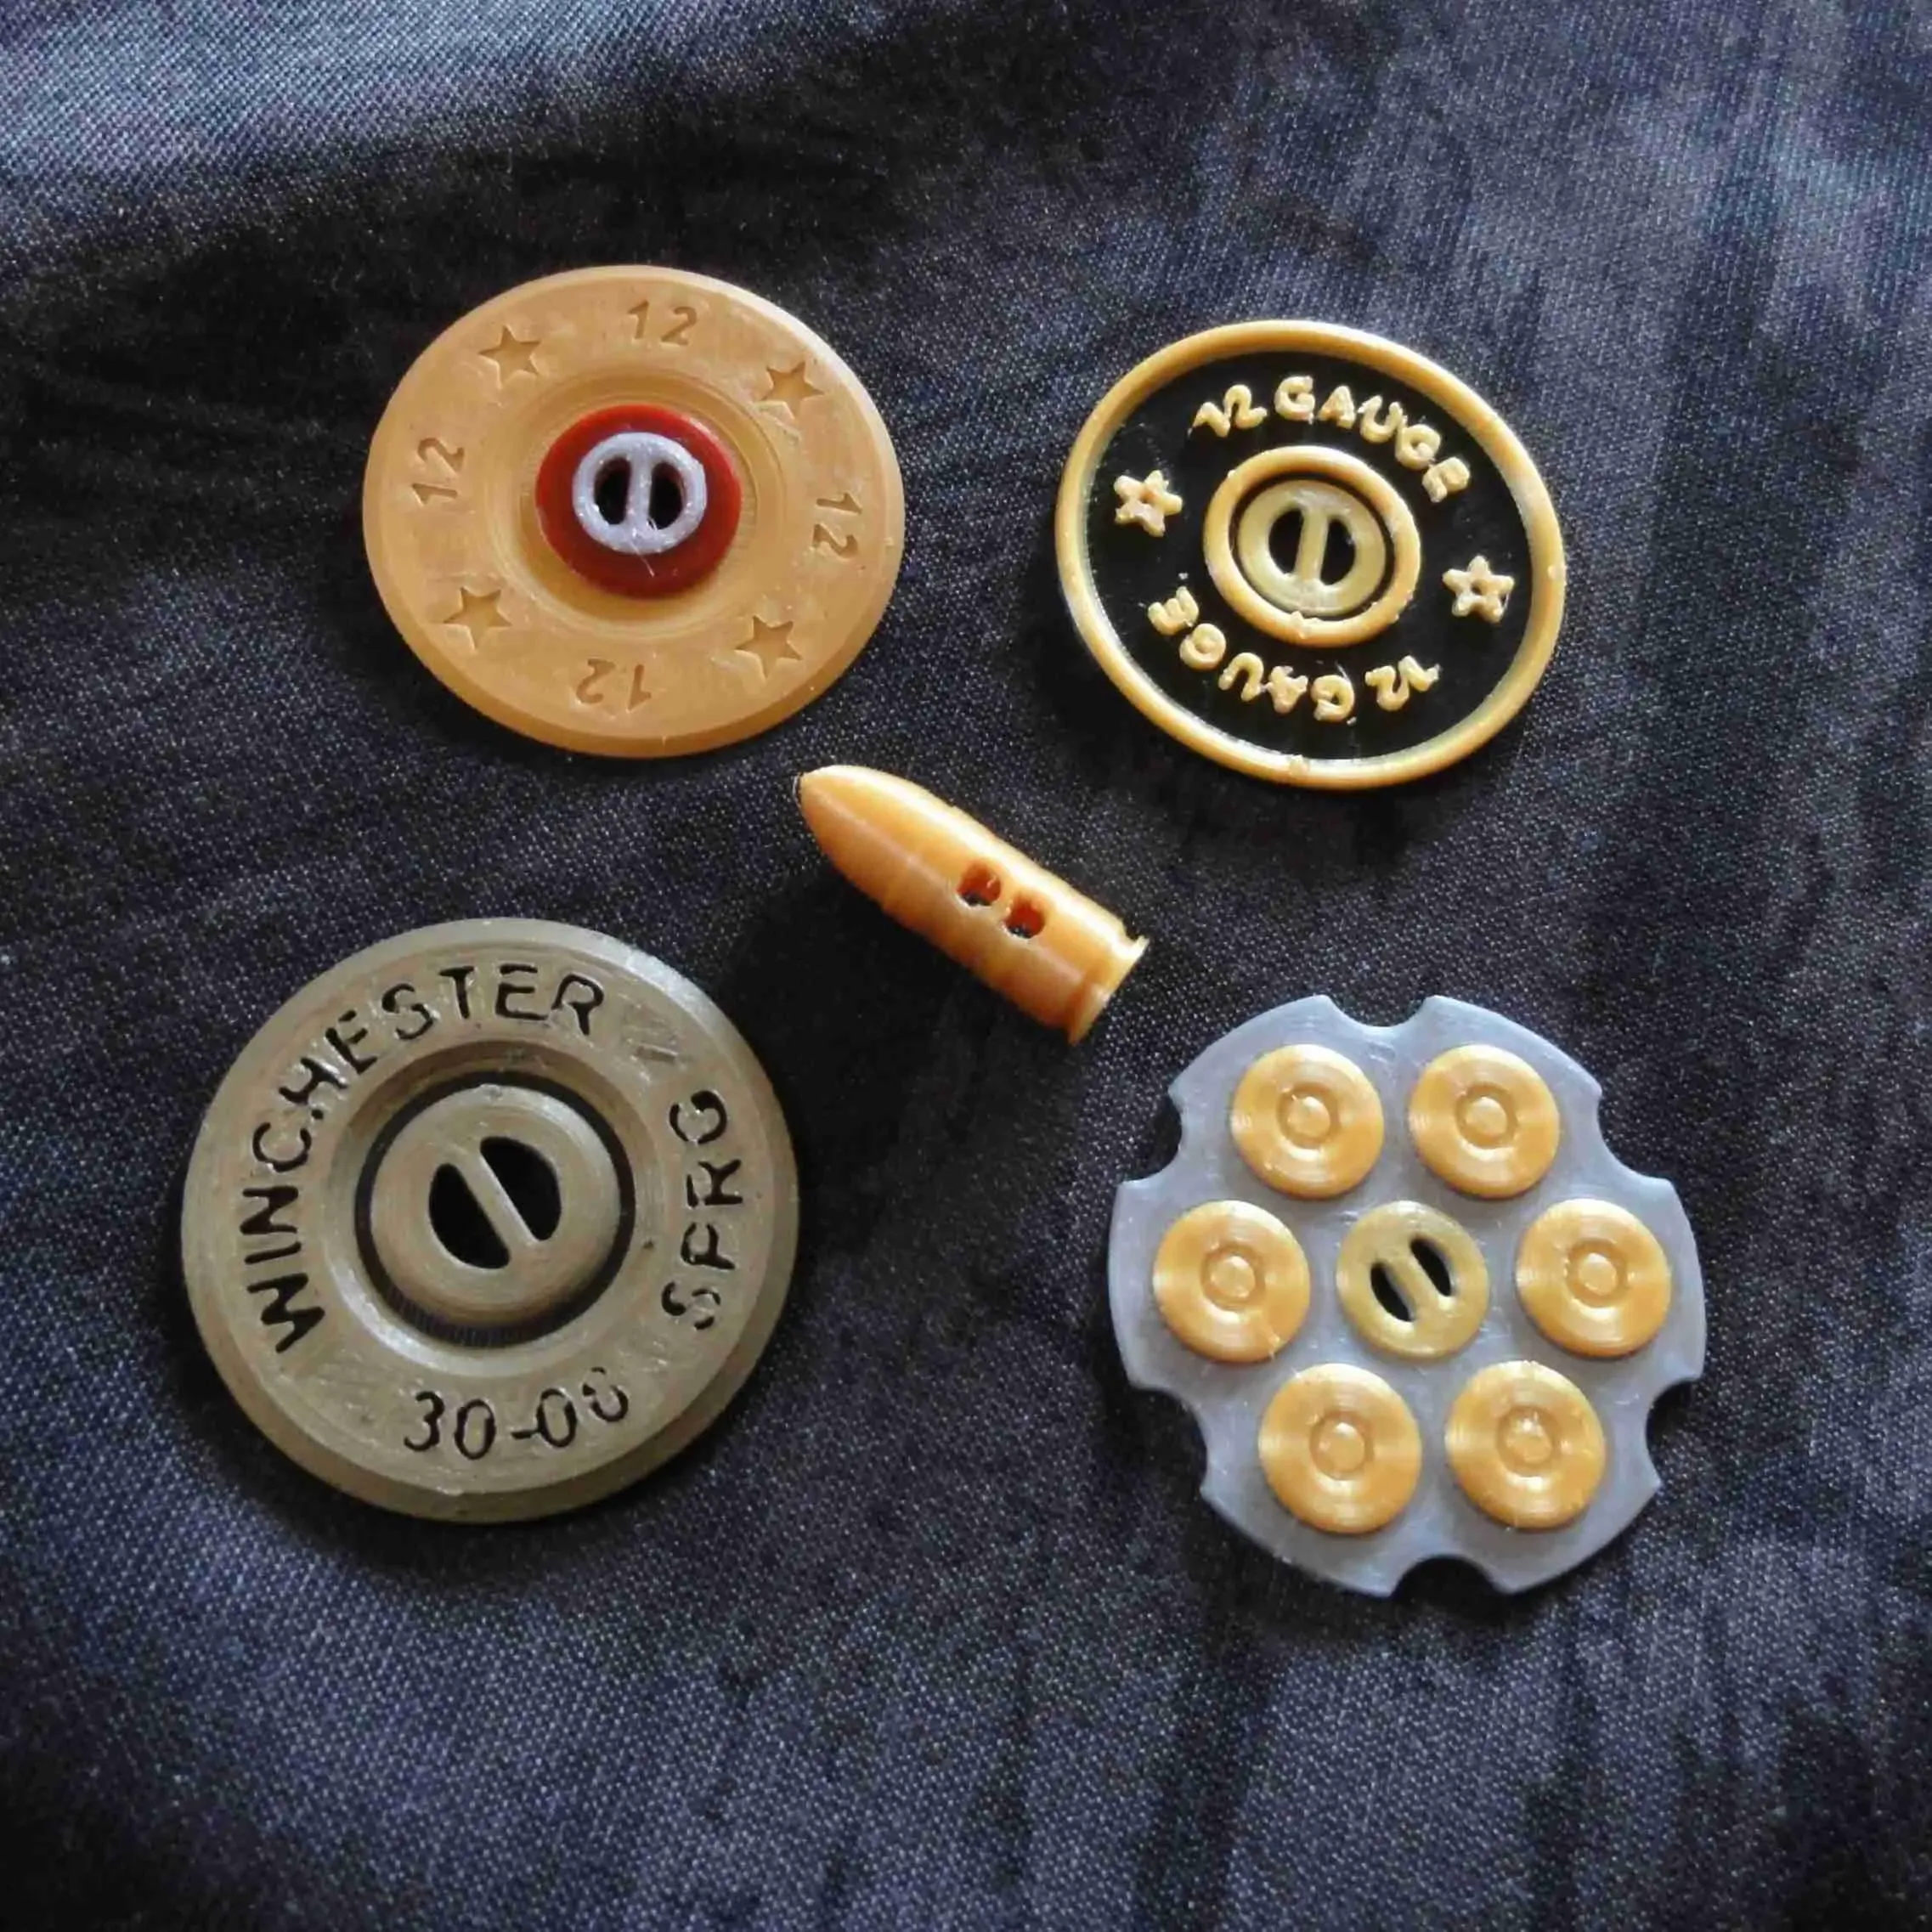 Bullet Clothing Buttons - Clothes Buttons Design Contest